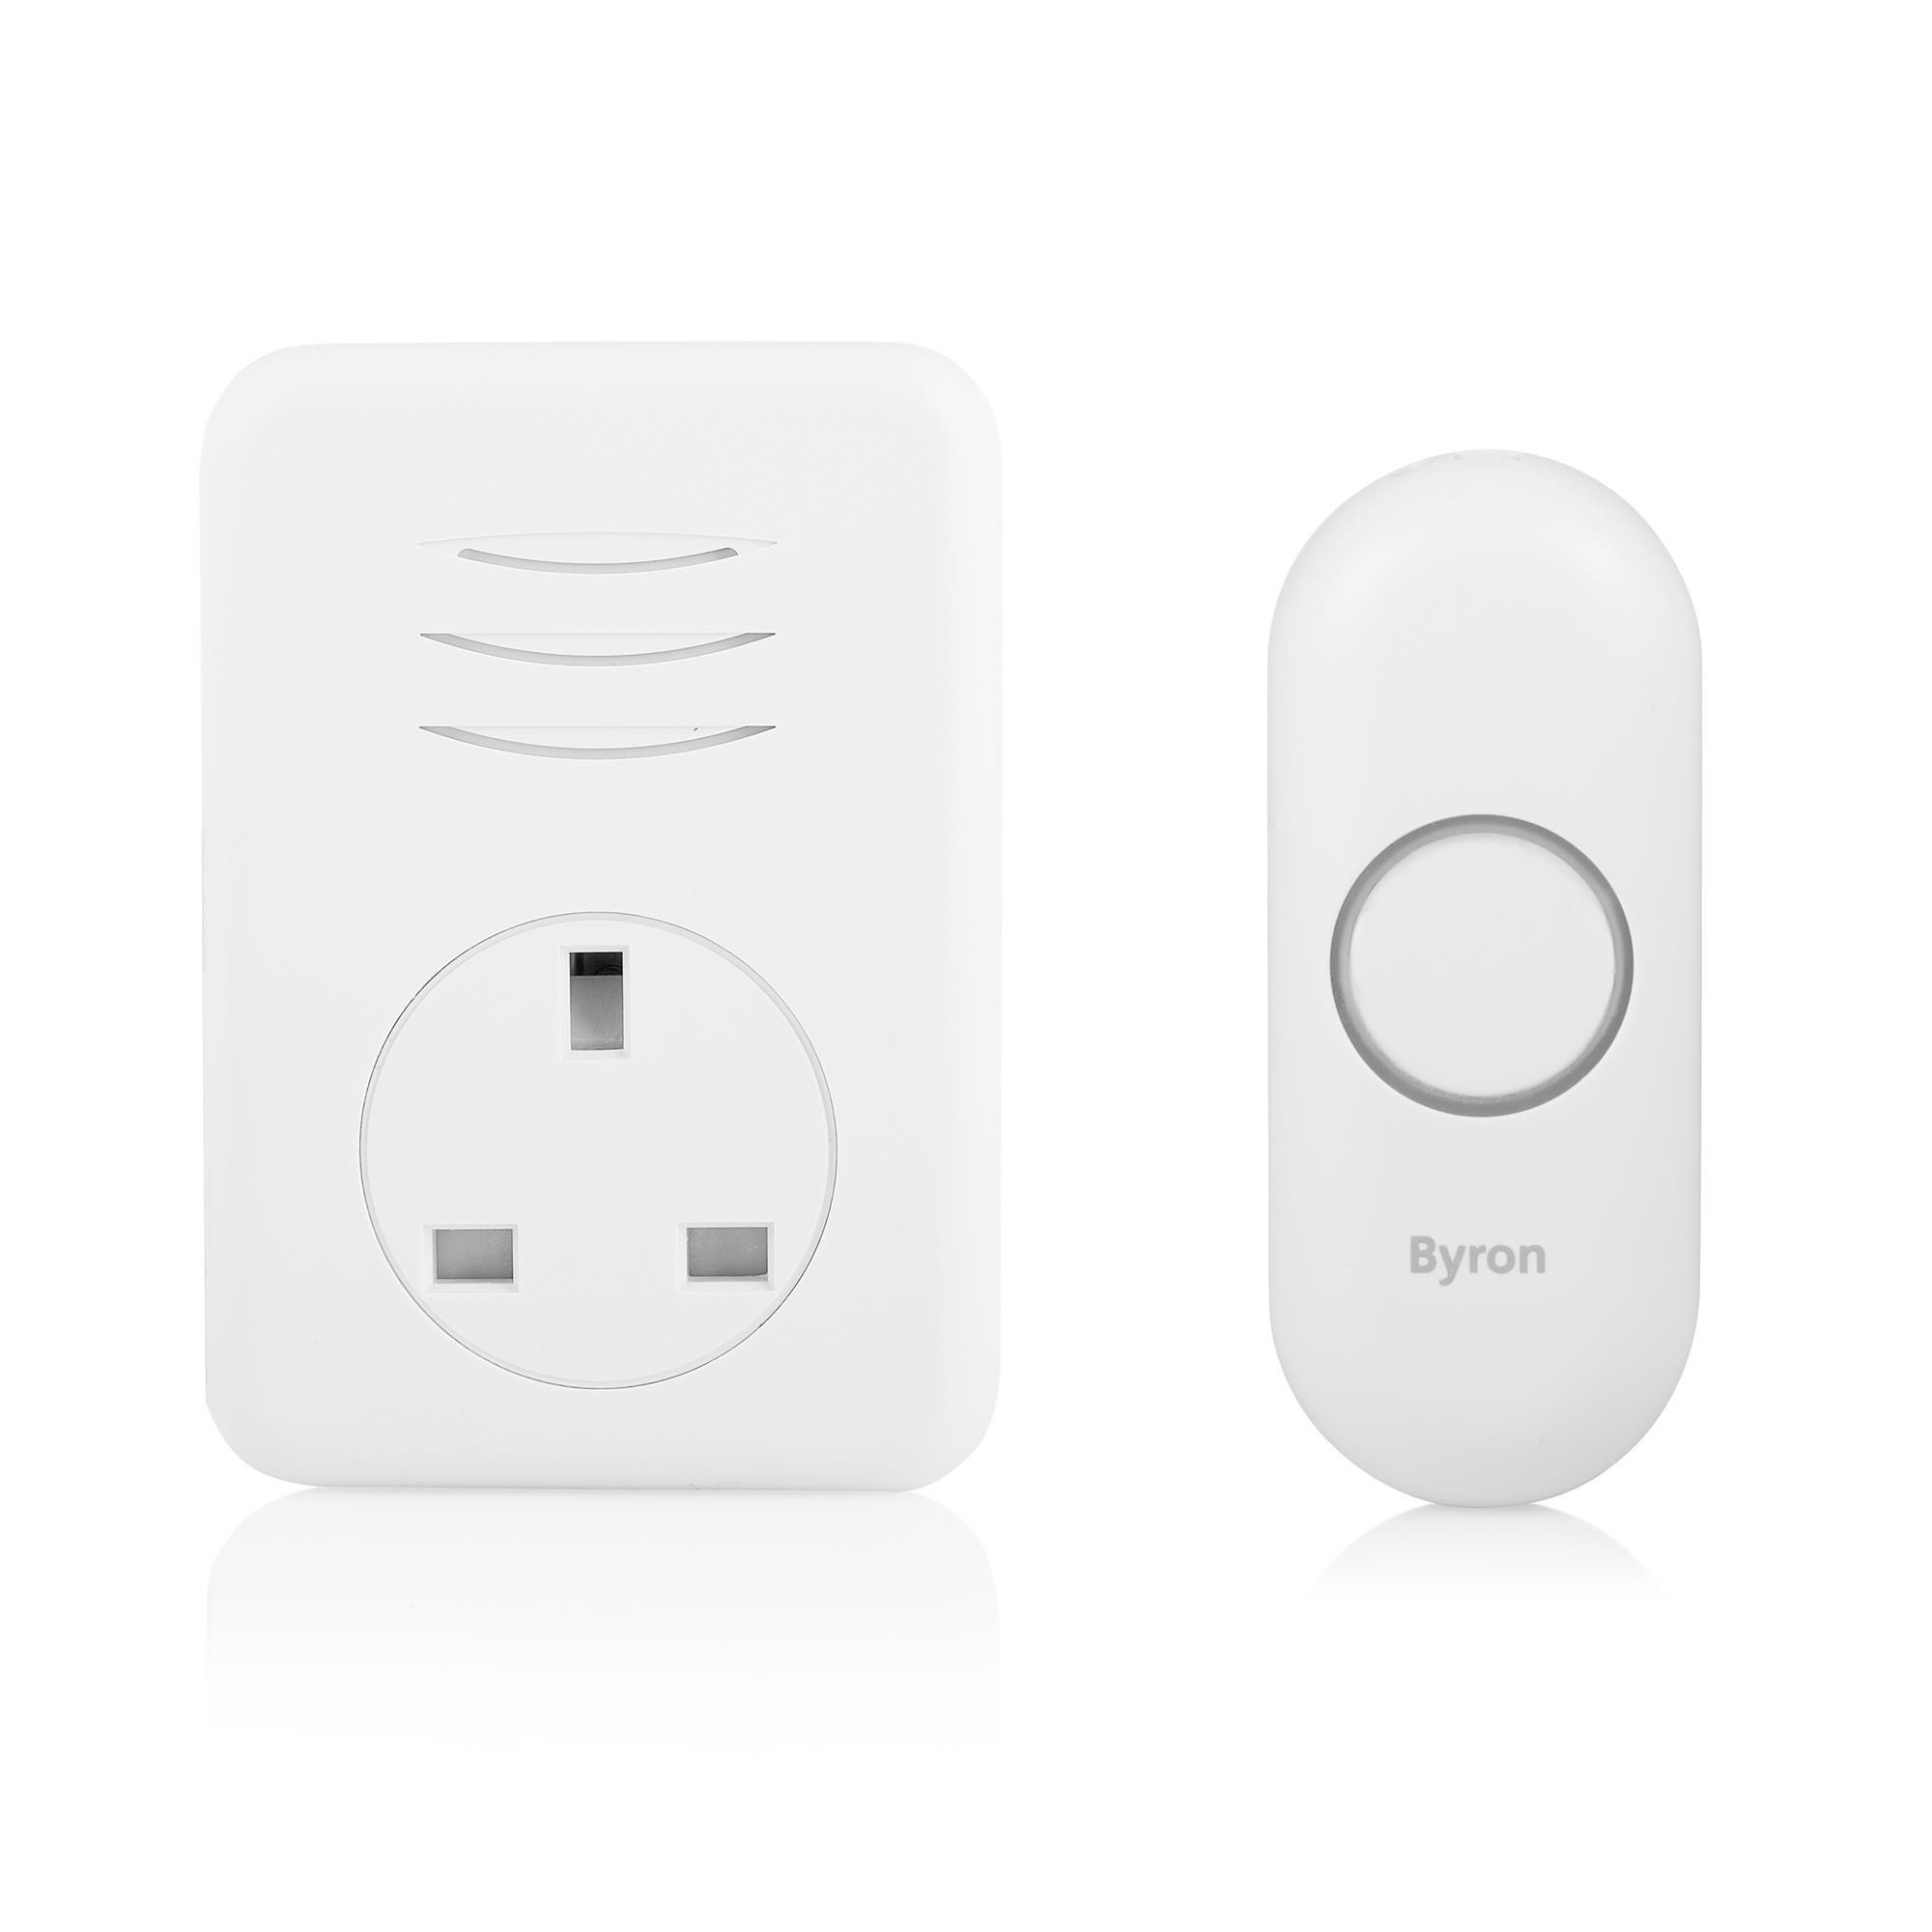 Byron White Wireless Door chime kit with Transformer not required DBY-22313BS-KF